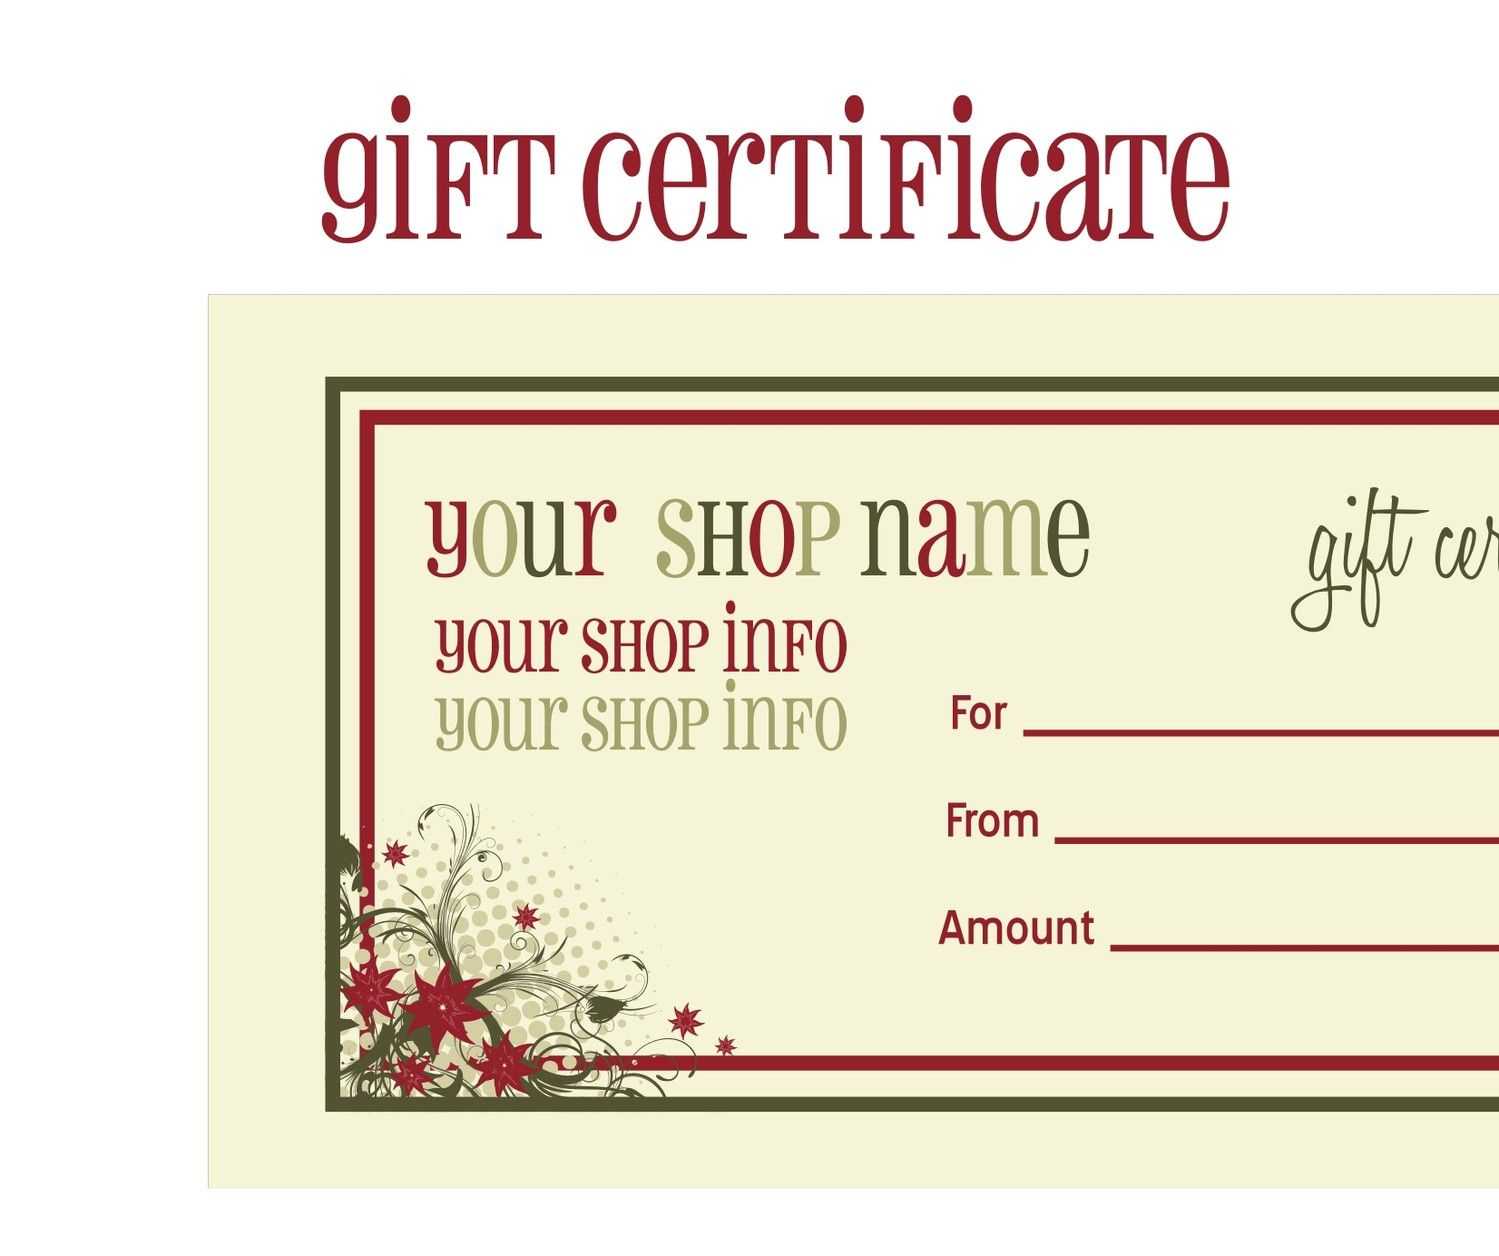 028 Stylish Free Gift Certificate Template Designs Photo Inside Free Christmas Gift Certificate Templates